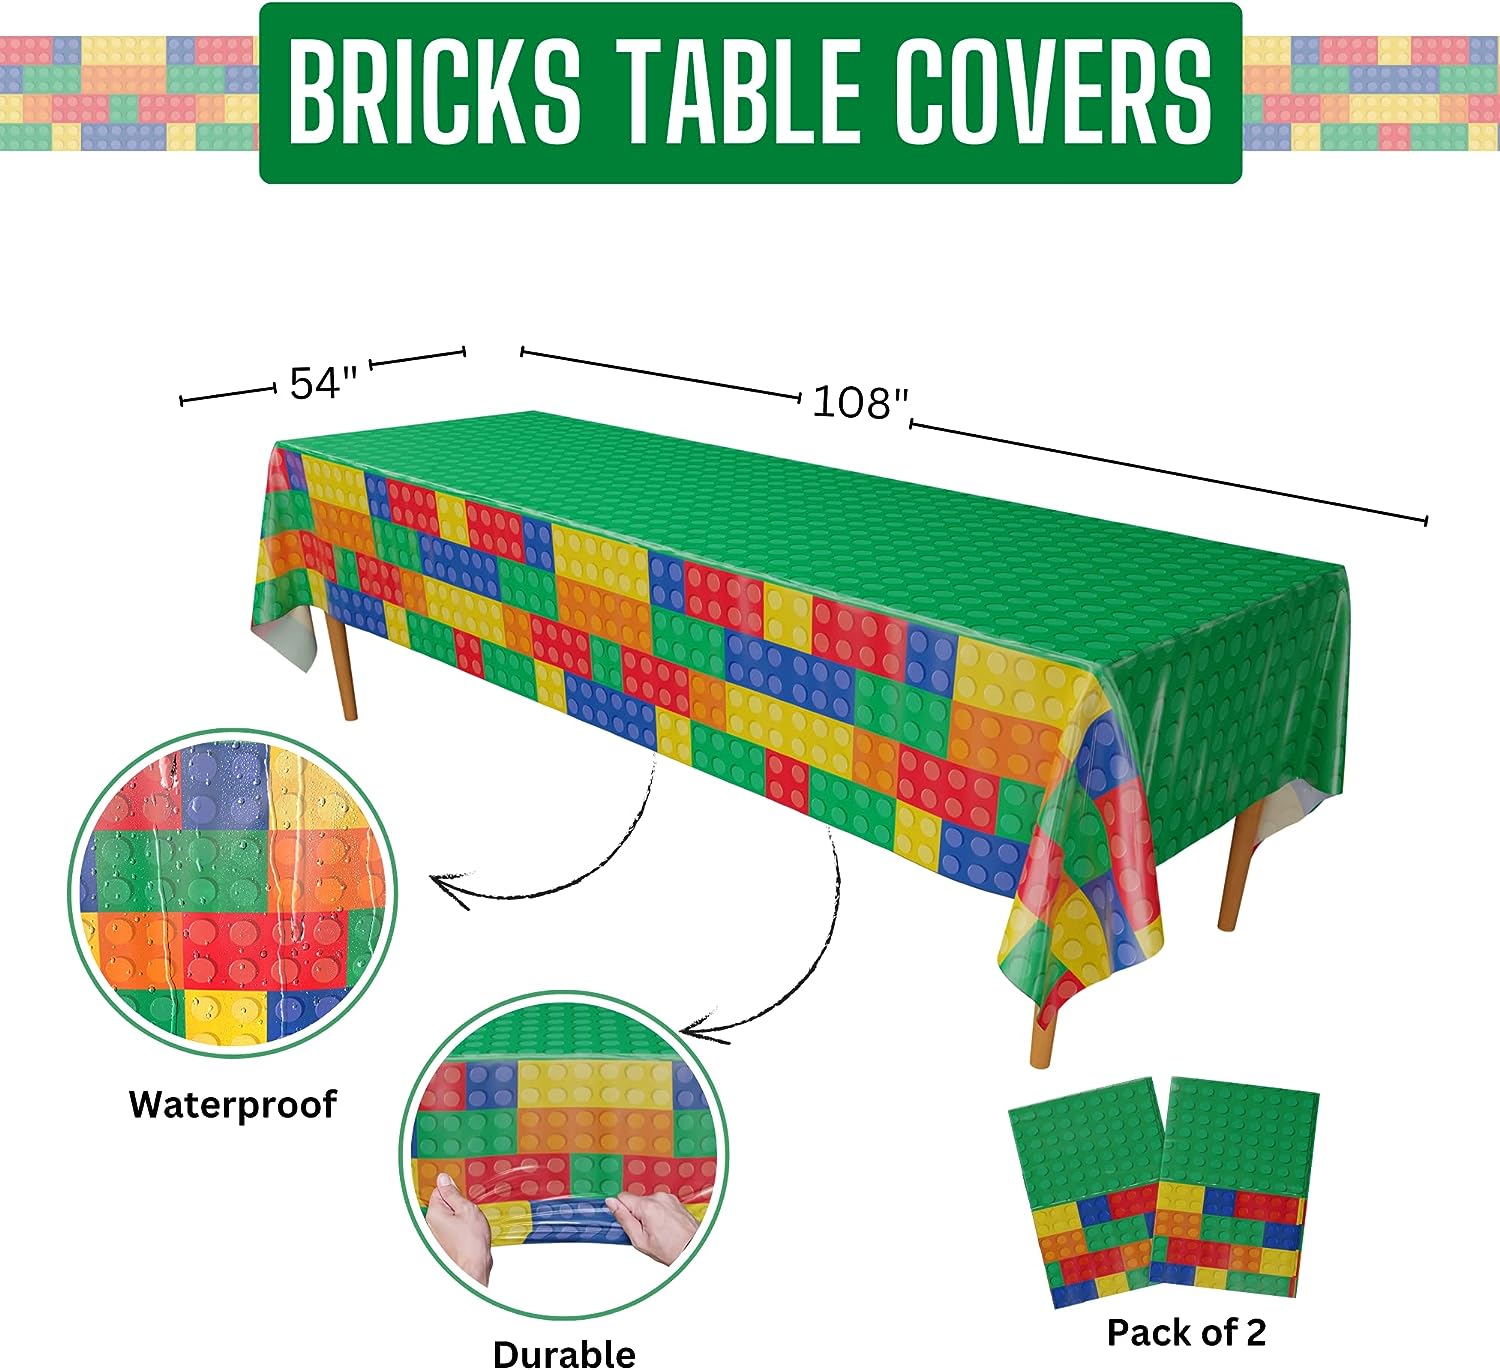 Brick Themed Table Covers with a brick-patterned design, adding a touch of building block fun to your party or event decorations.